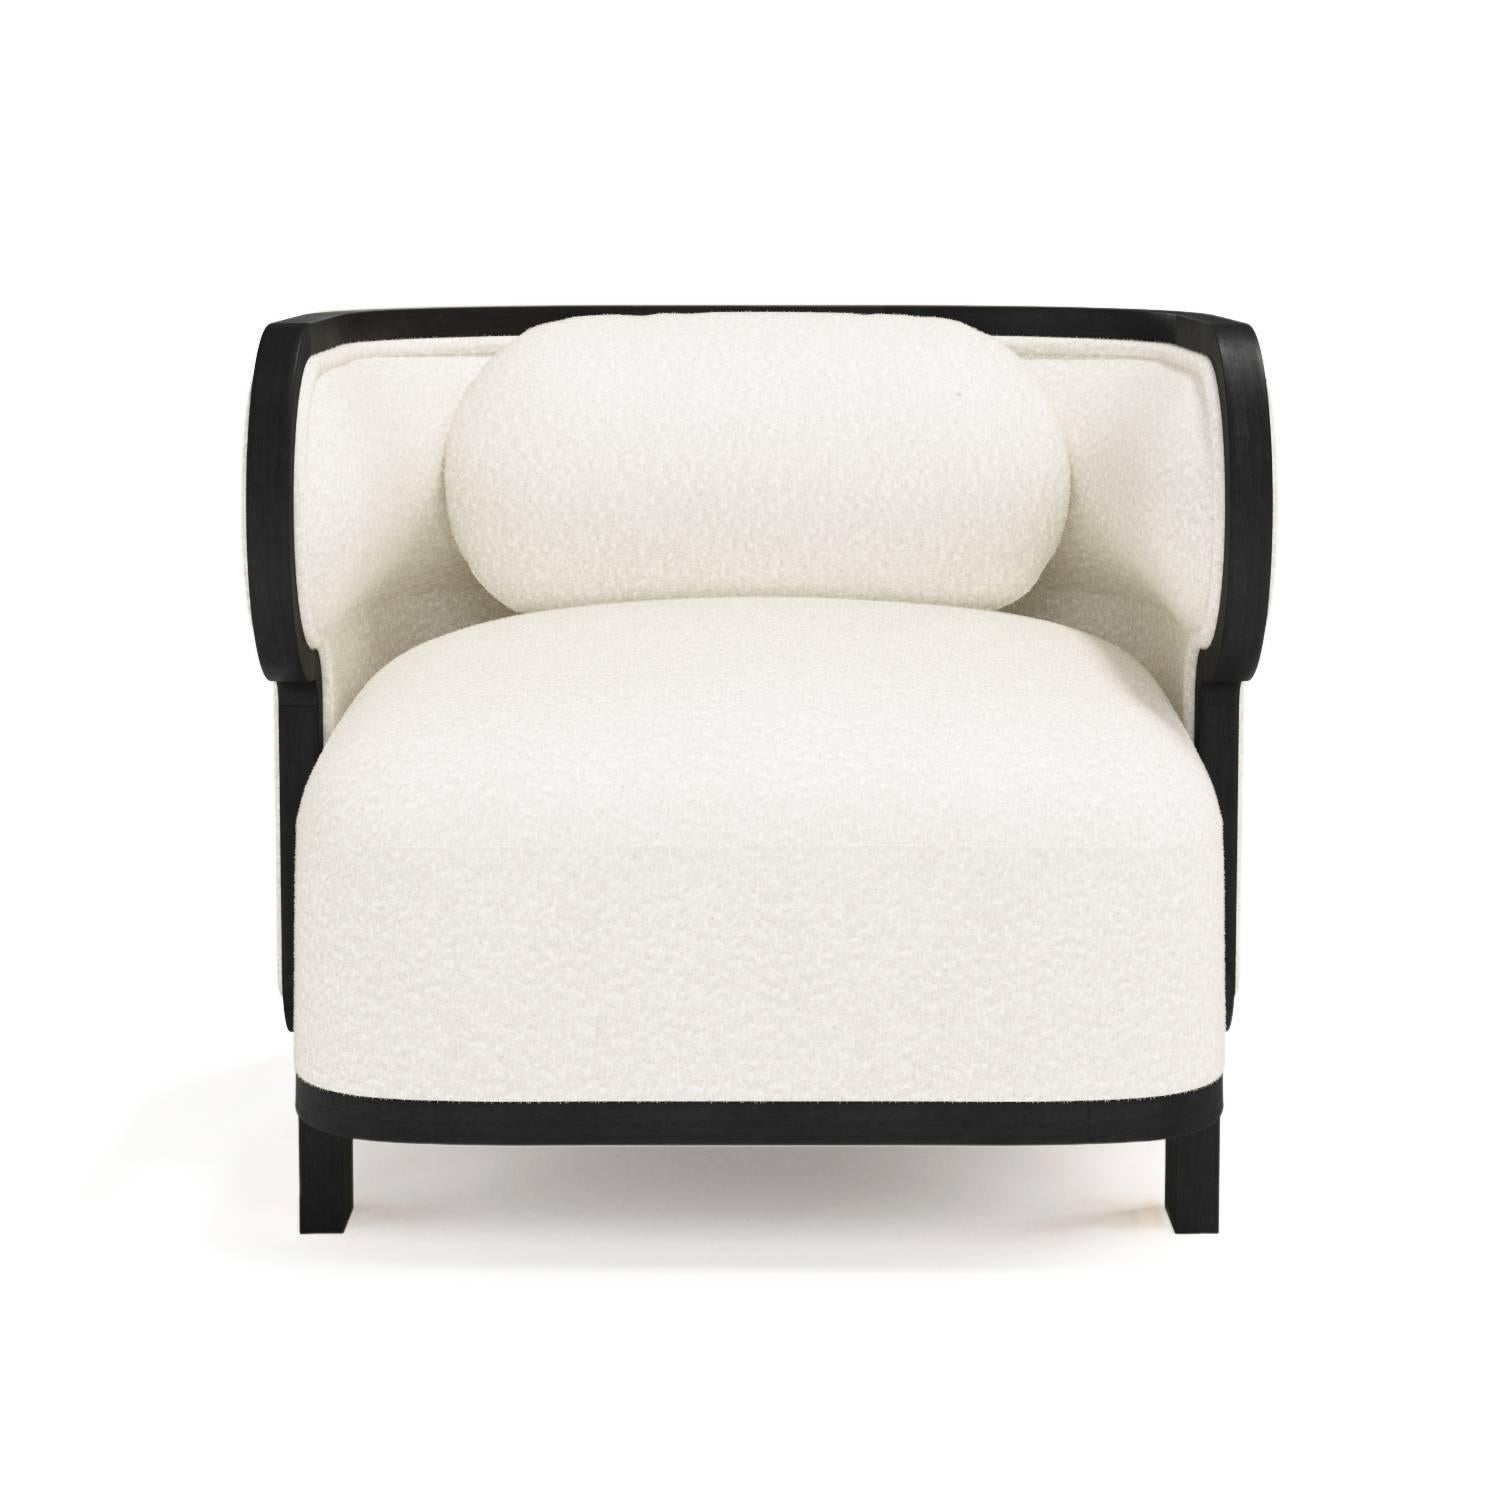 The Odette club chair is a modern take on the cozy wingback armchair that defies all categorizations, being also describable as a Bergère, as well as a barrel chair, thanks to its wooden frame and curved back. Upholstered with brushed Casentino